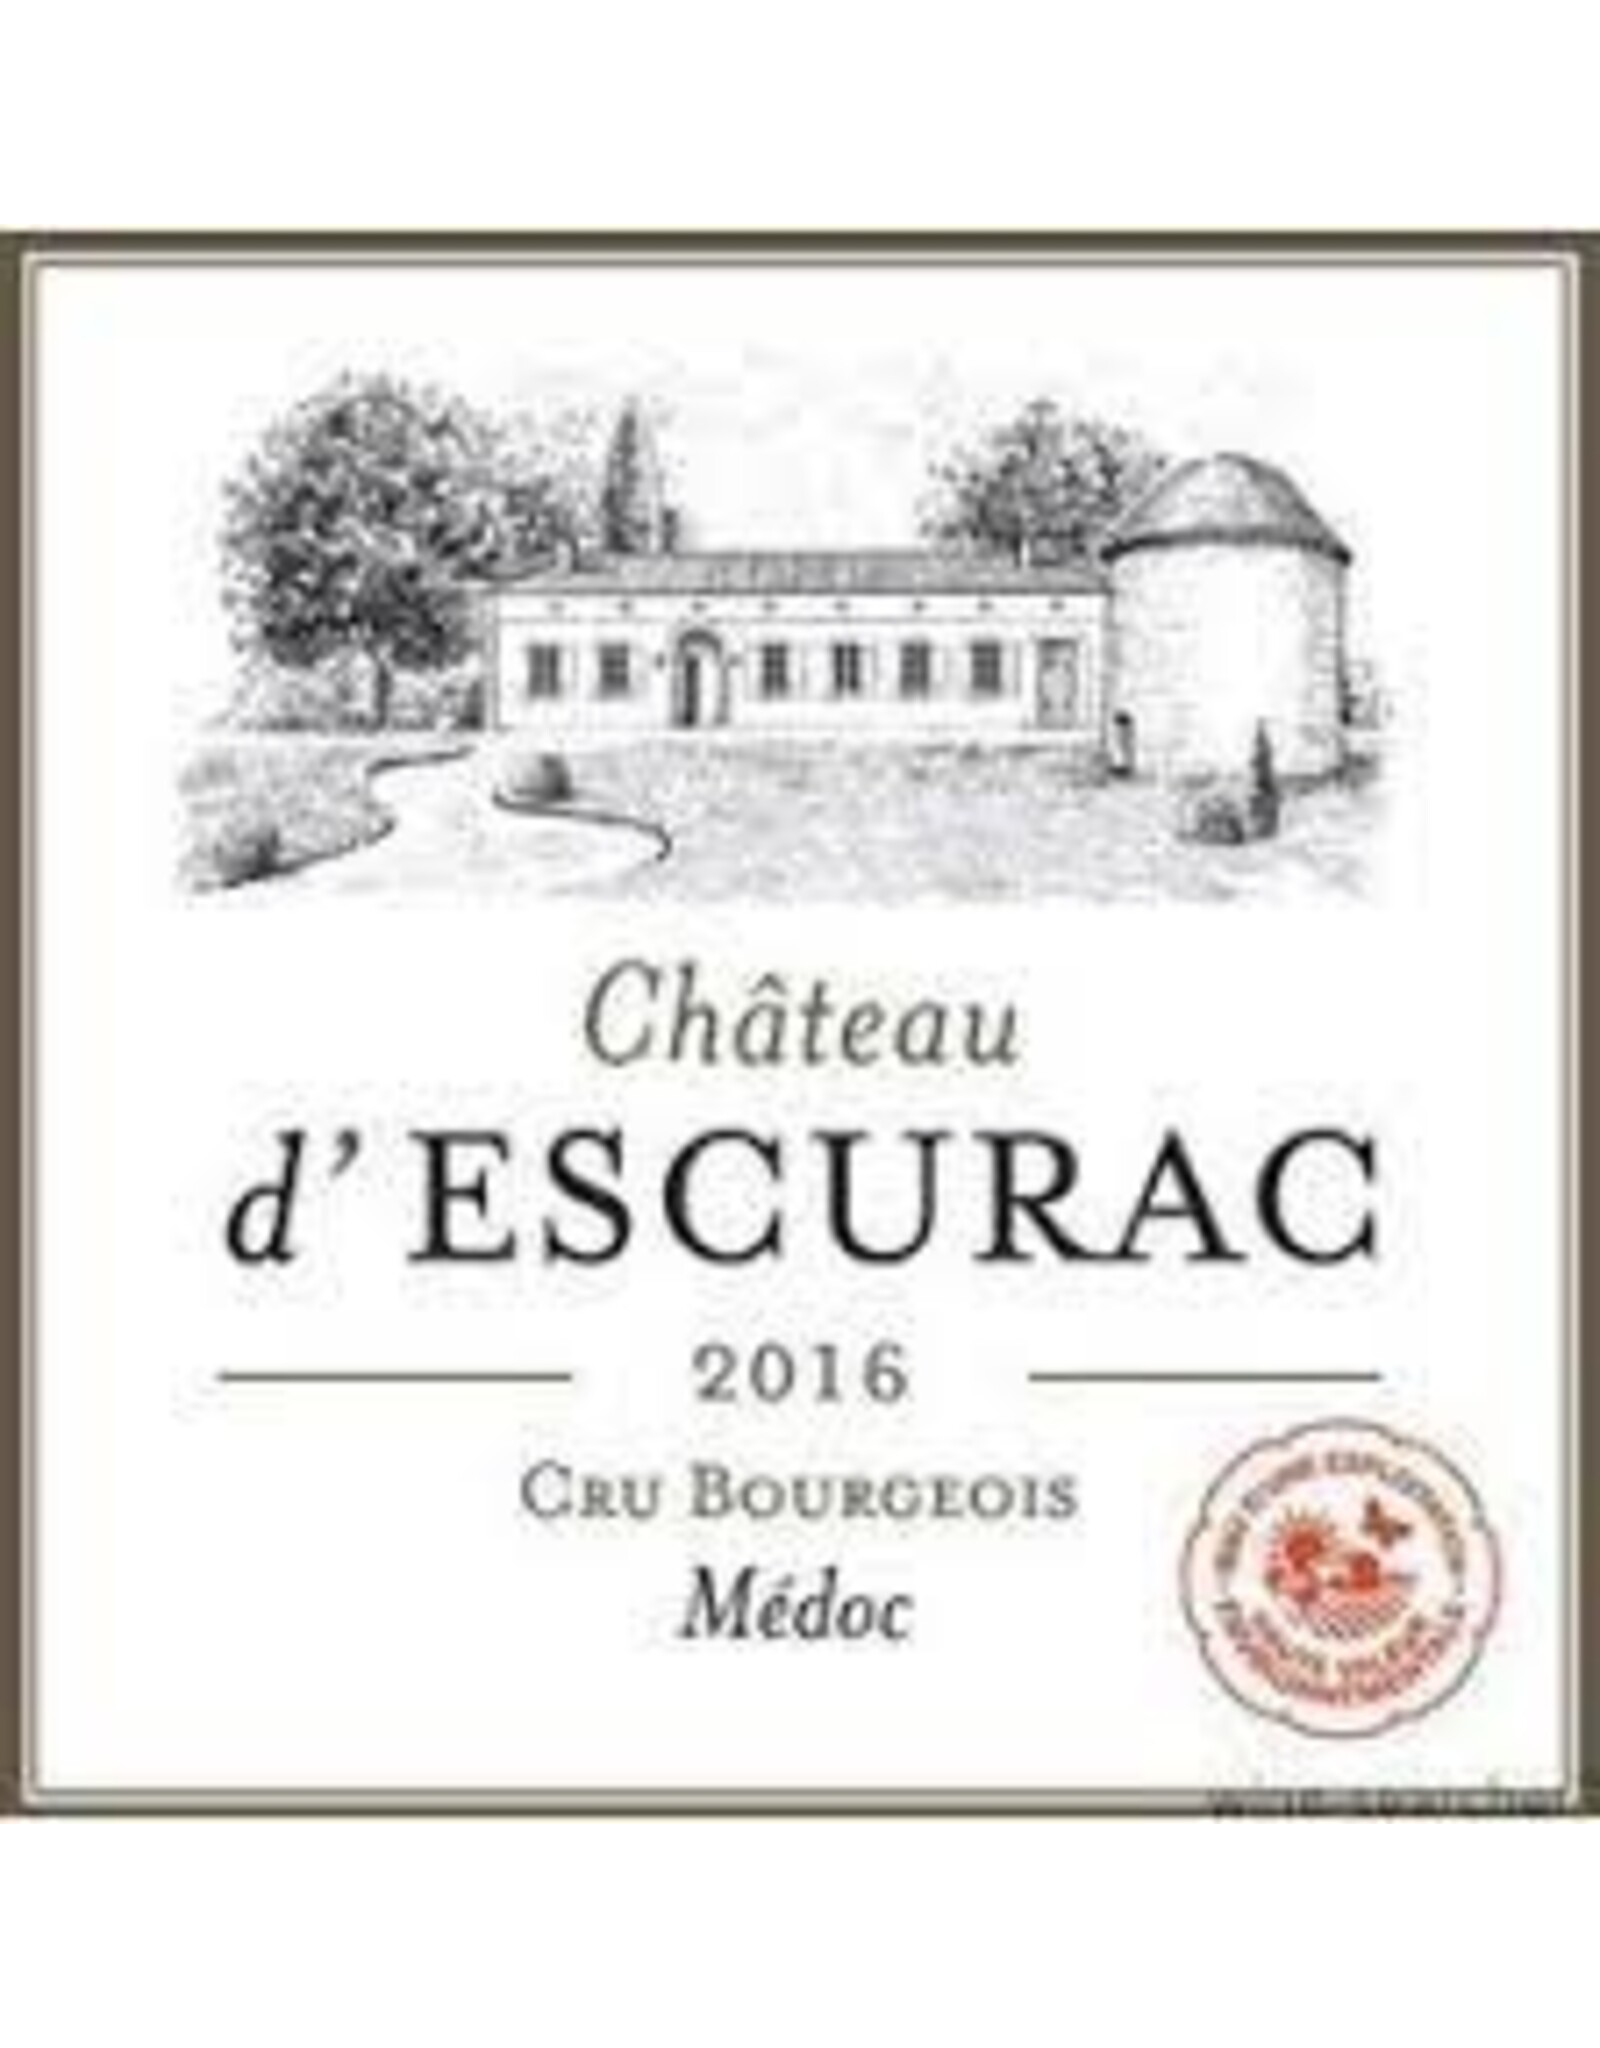 CHATEAUD'ESCURAC MEDOC 2016